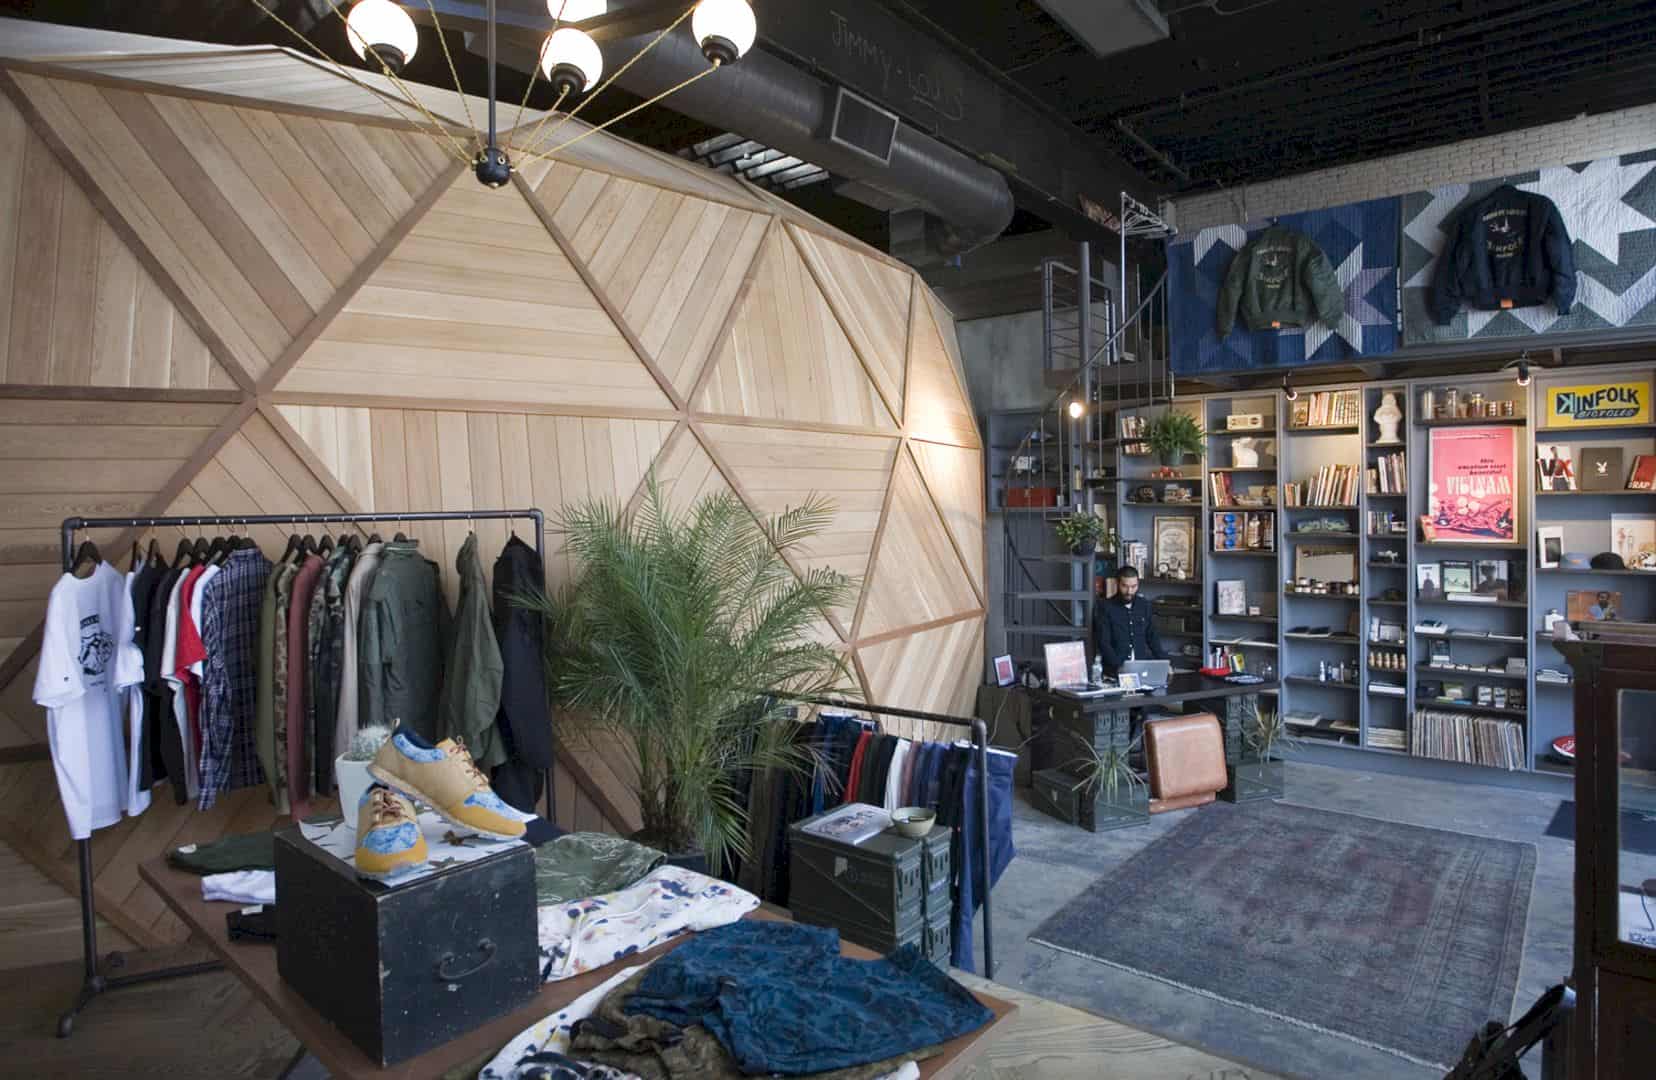 Kinfolk 94 A Multipurpose Even Space Bar And Retail In Brooklyn 1